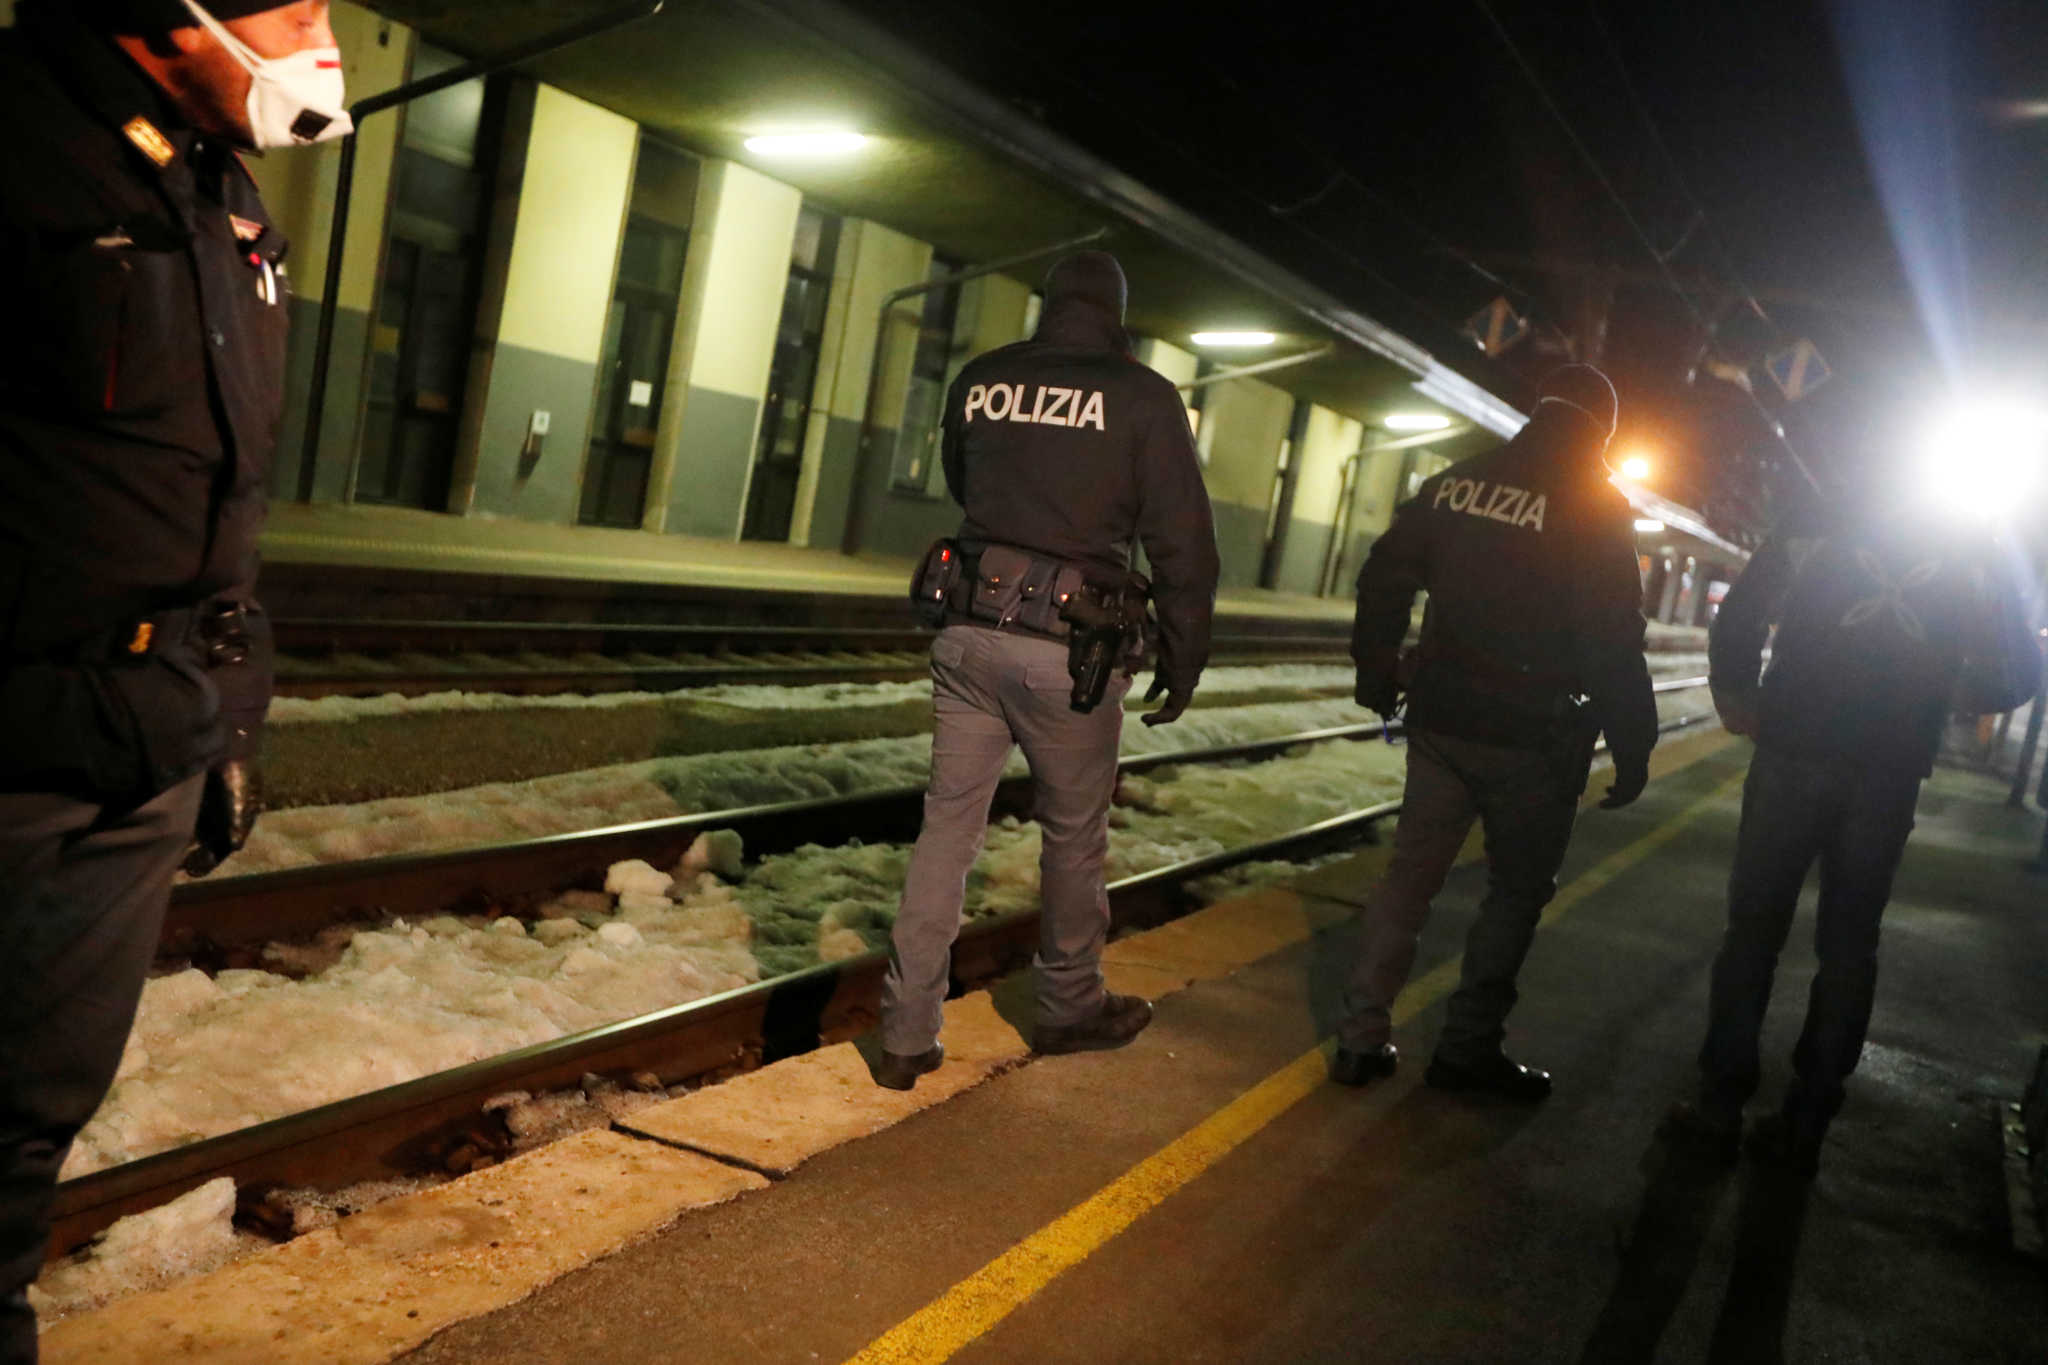 Italian police officers are seen inside the Brennero-Brenner train station in Italy after the train left, February 23, 2020. REUTERS/Leonhard Foeger